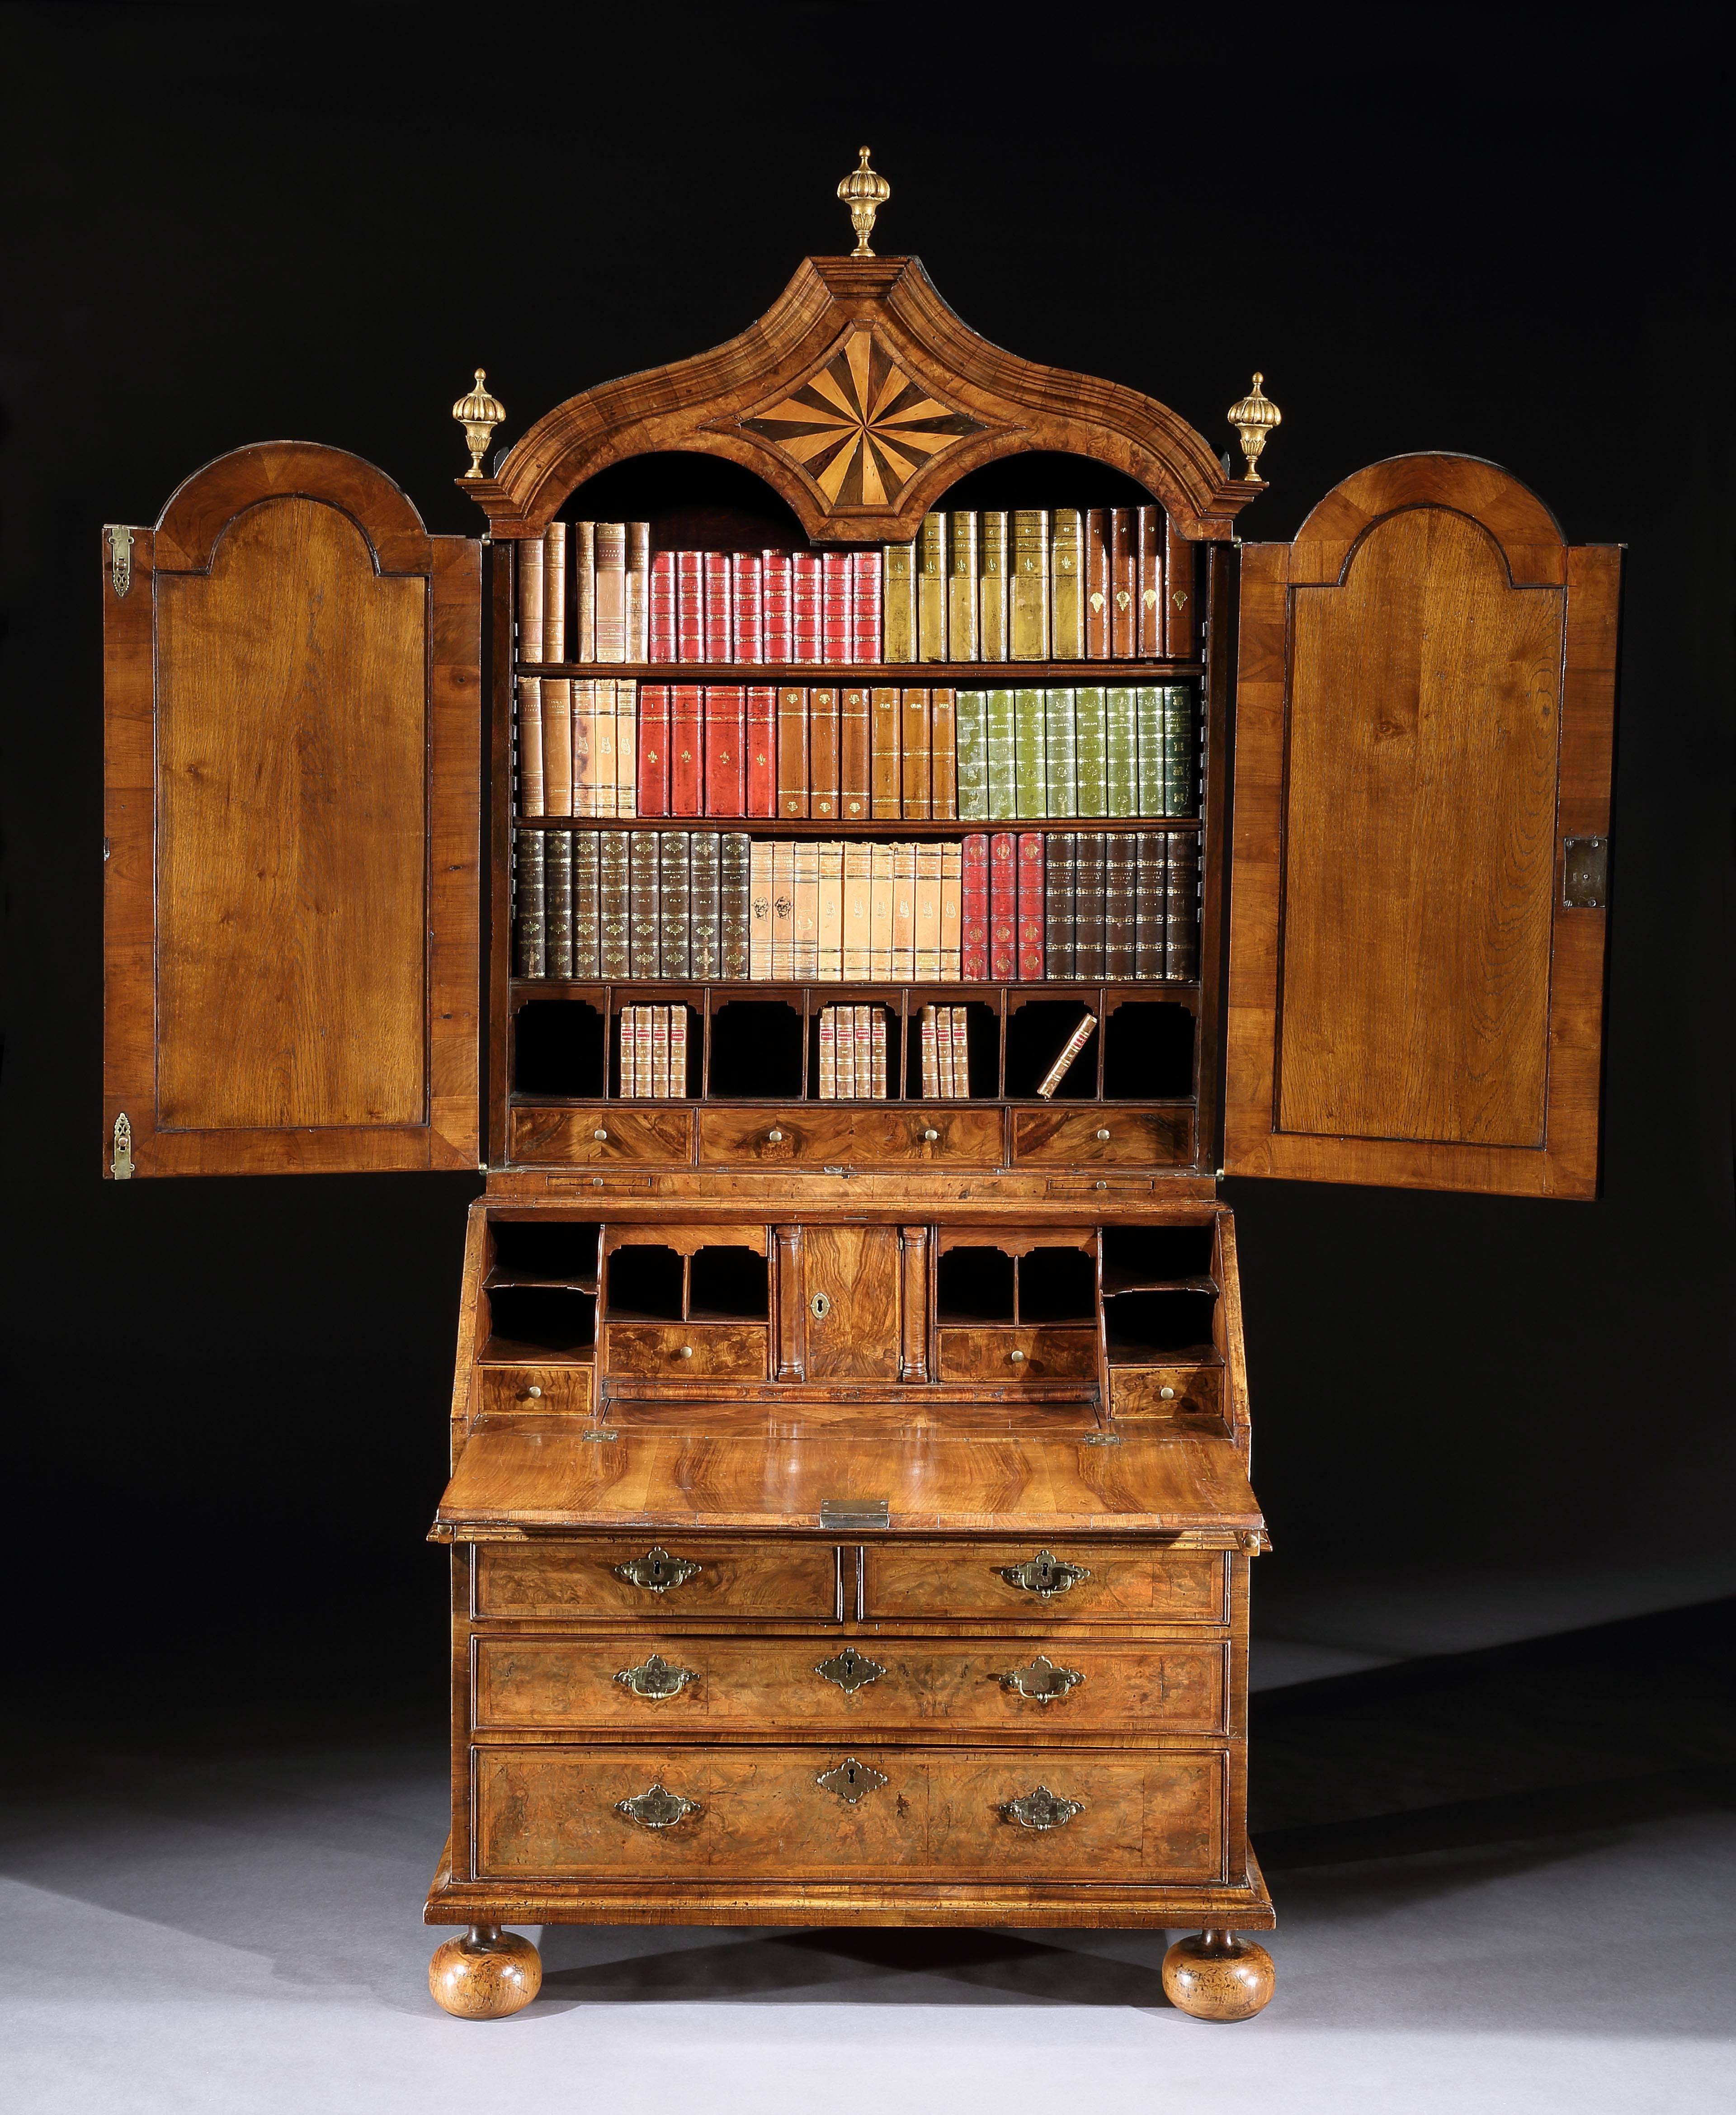 Dating from the late 17th century, this mirror plated, domed bureau bookcase is veneered in figured and burr walnut. The twin mirrored doors open to reveal a top part with drawers, pigeon holes and adjustable shelving. The base with an interior